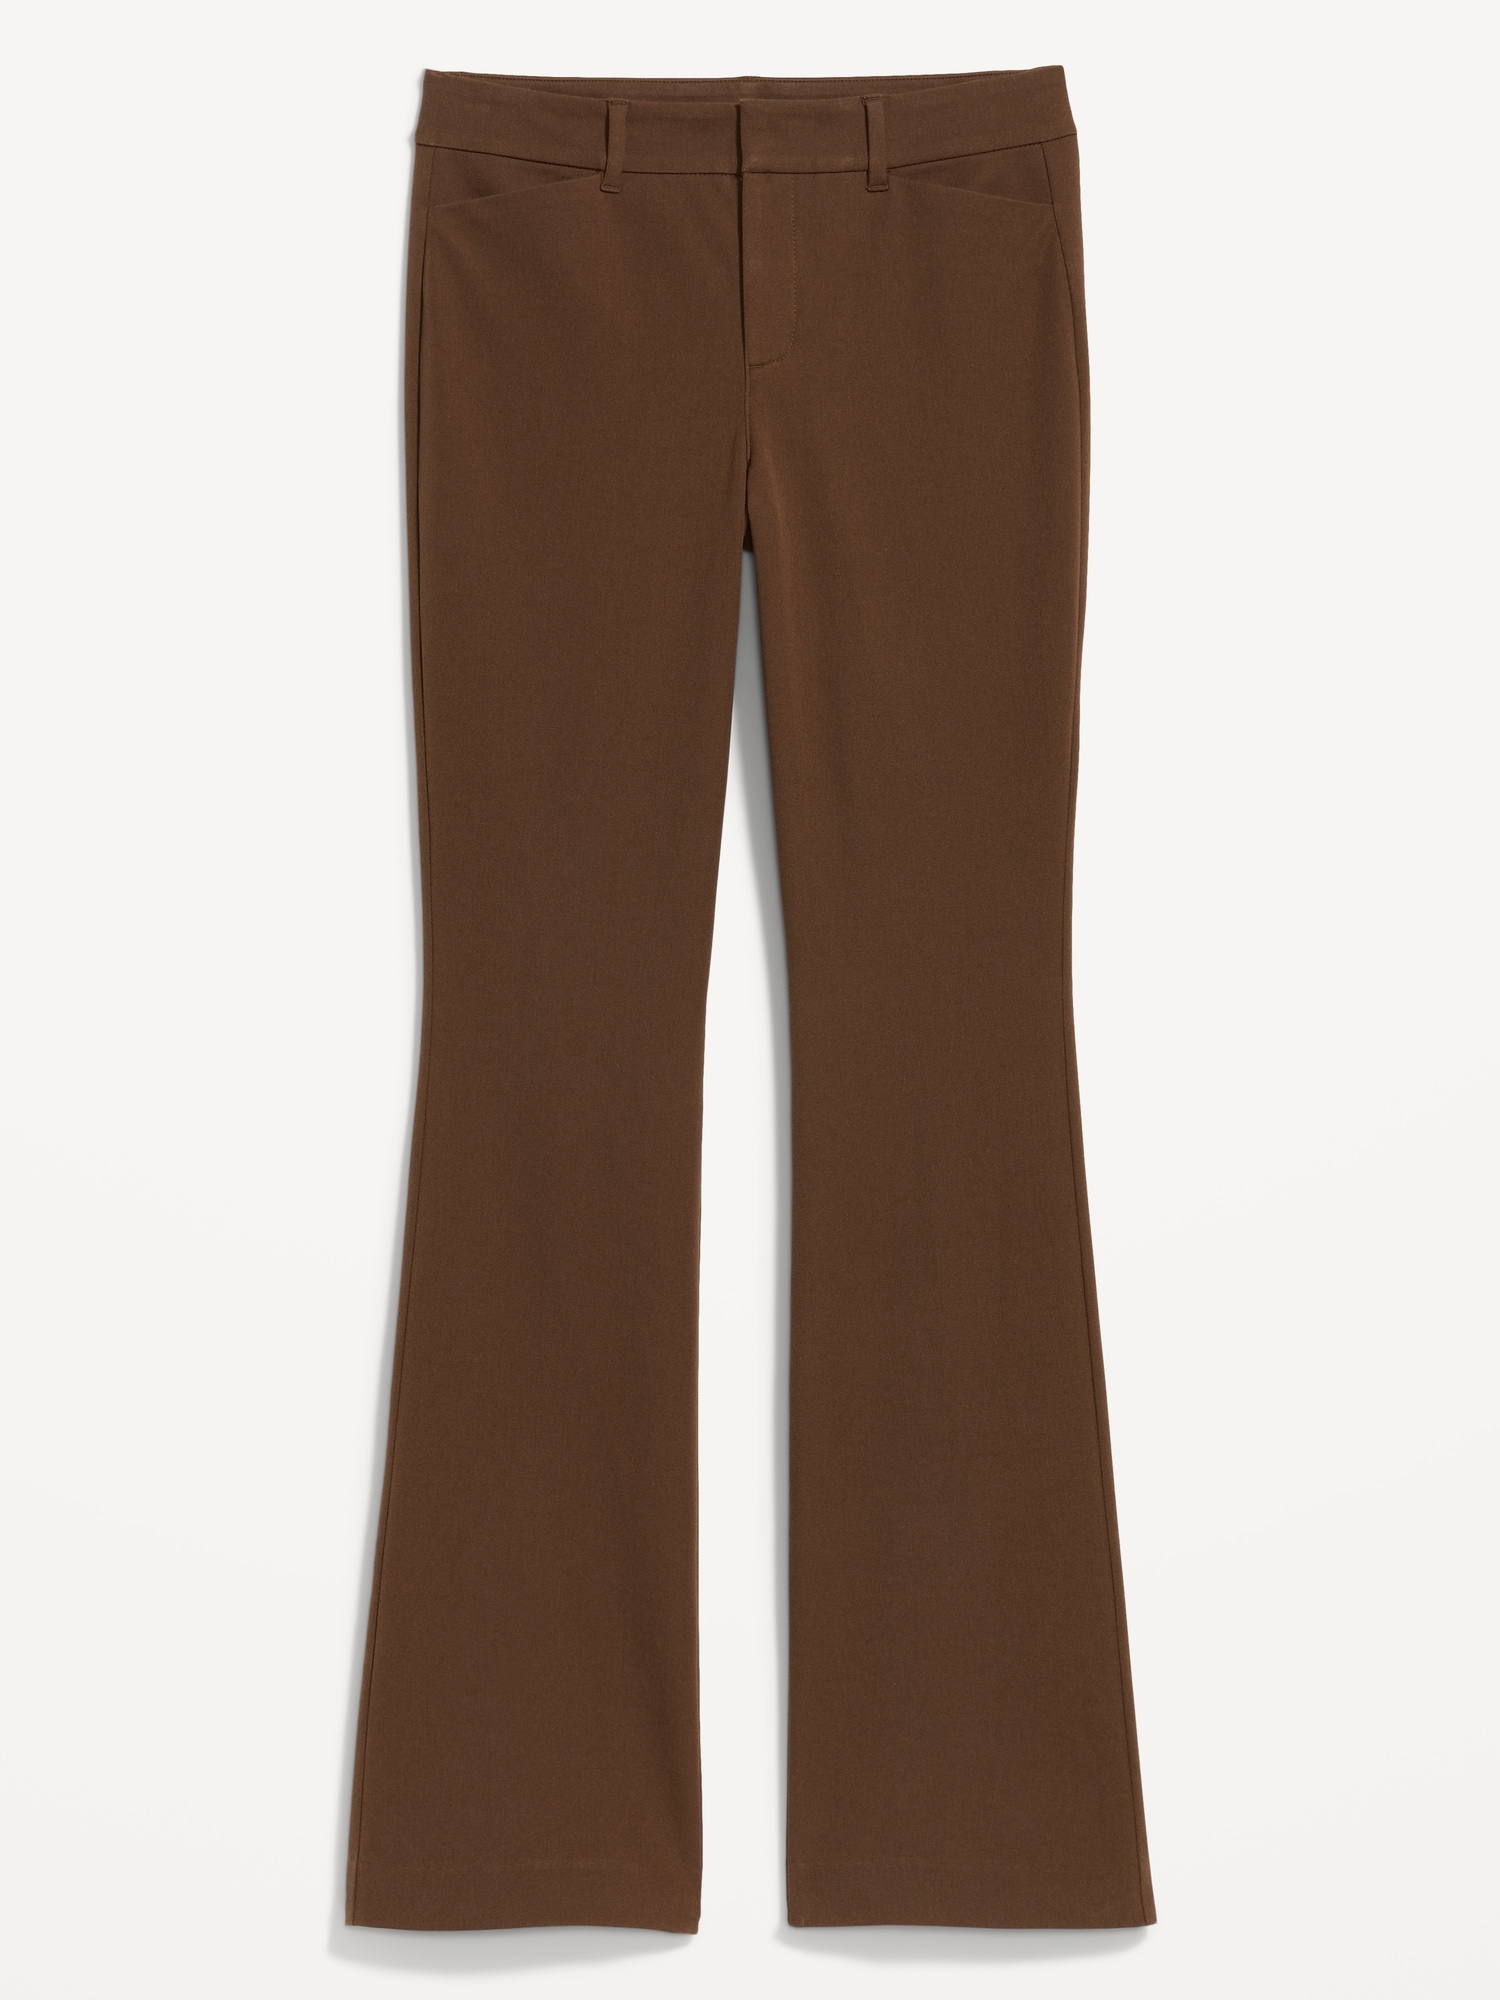 High-Waisted Pixie Flare Pants for Women, Old Navy